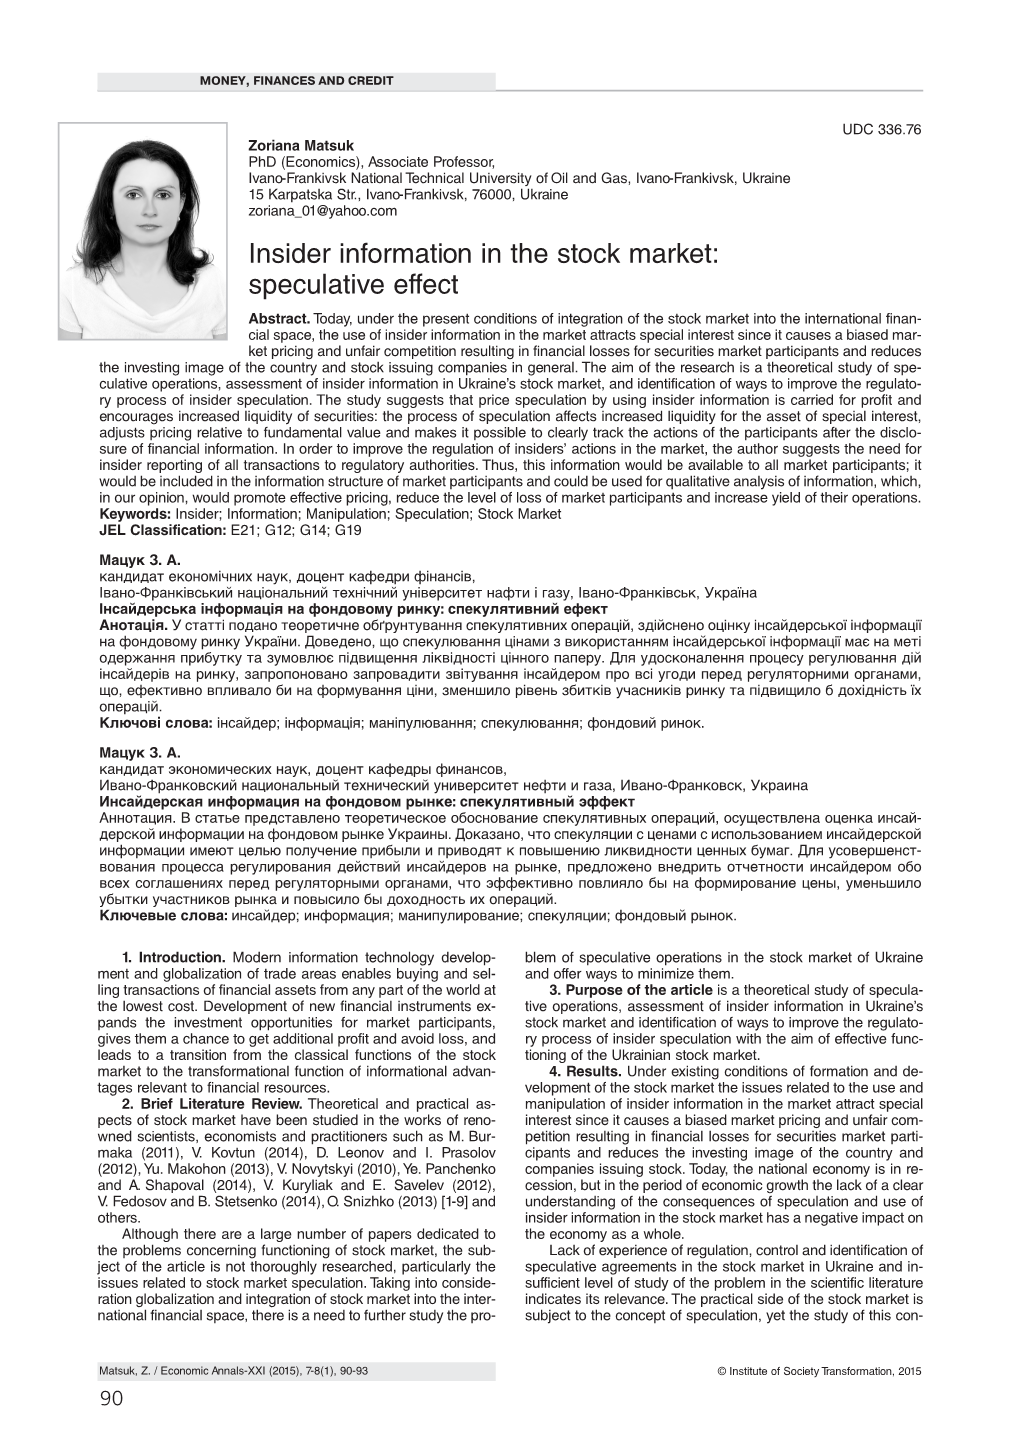 Insider Information in the Stock Market: Speculative Effect Abstract